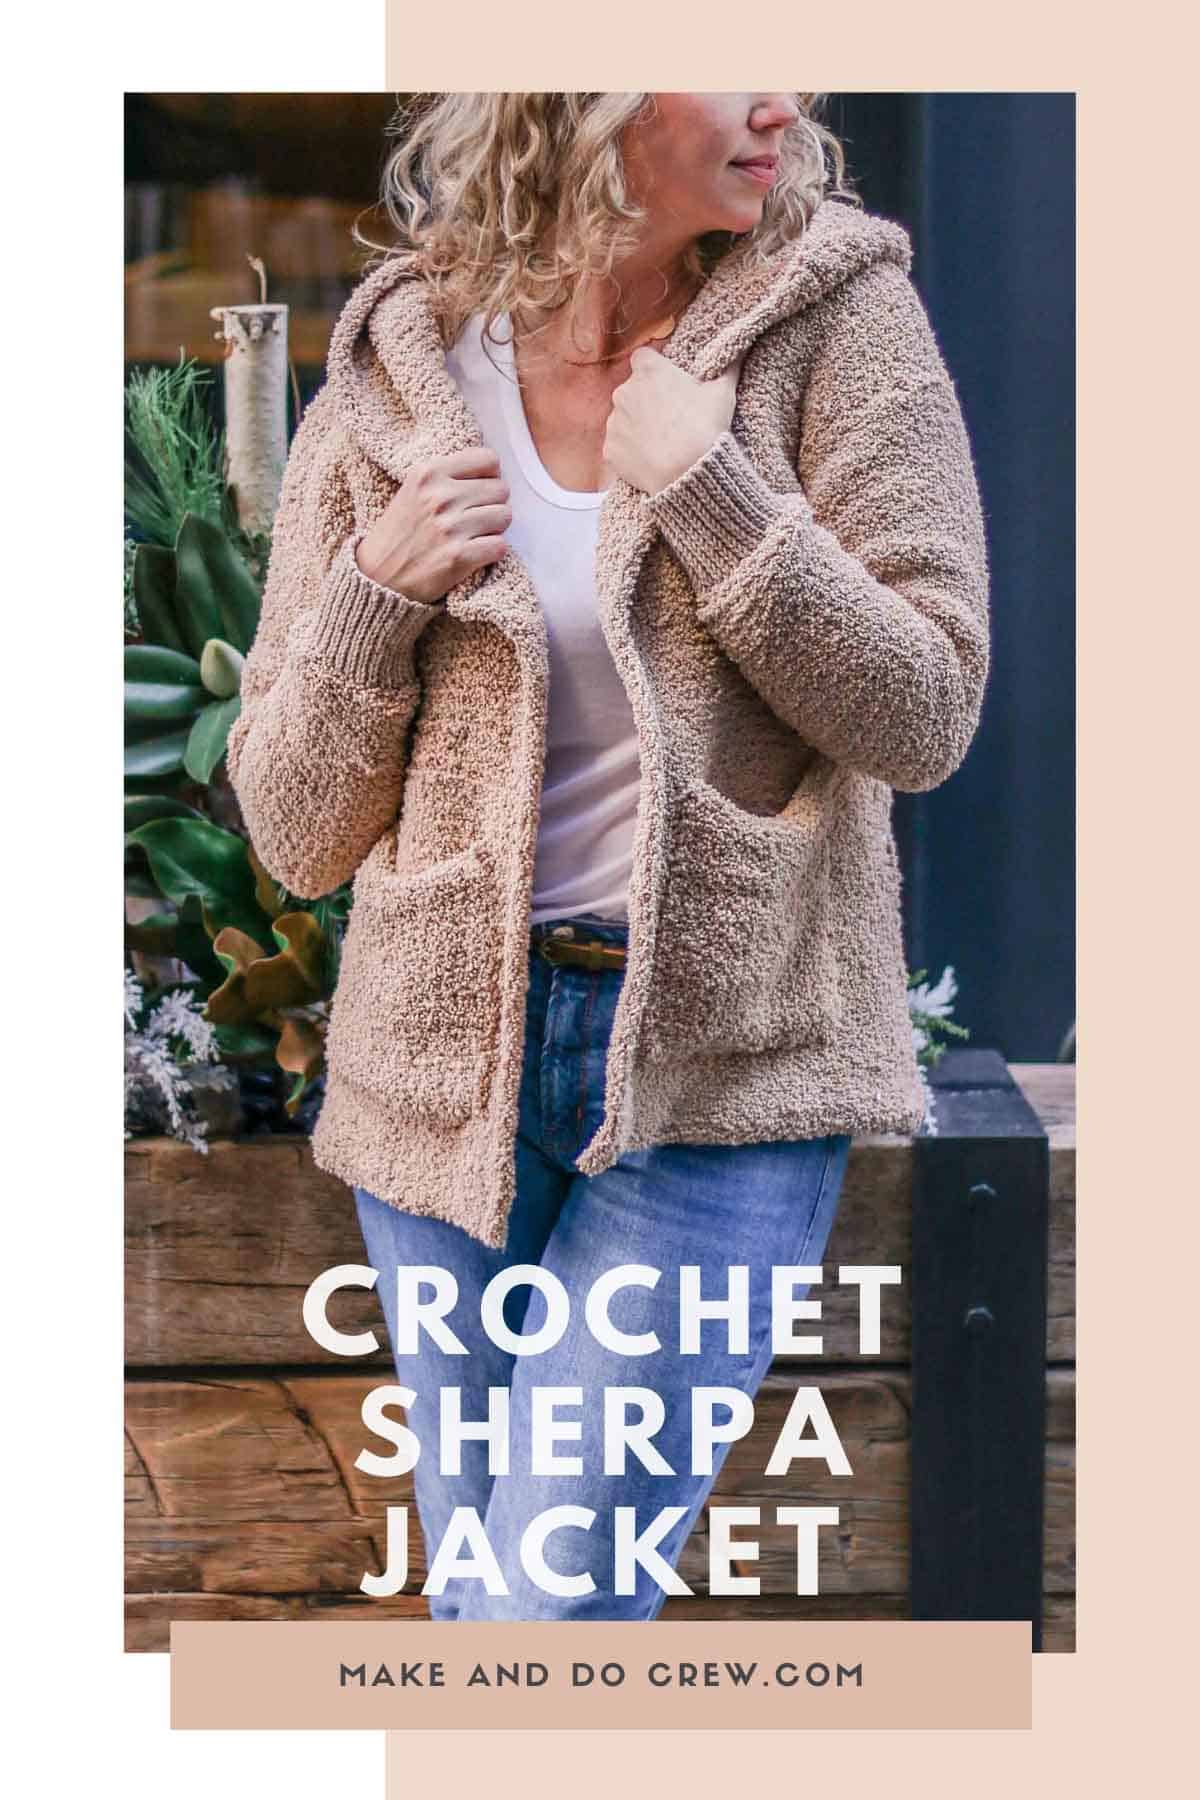 Use basic Tunisian crochet skills, you can make this hooded crochet sherpa sweater jacket pattern from Make & Do Crew. Free pattern + beginner video tutorials!